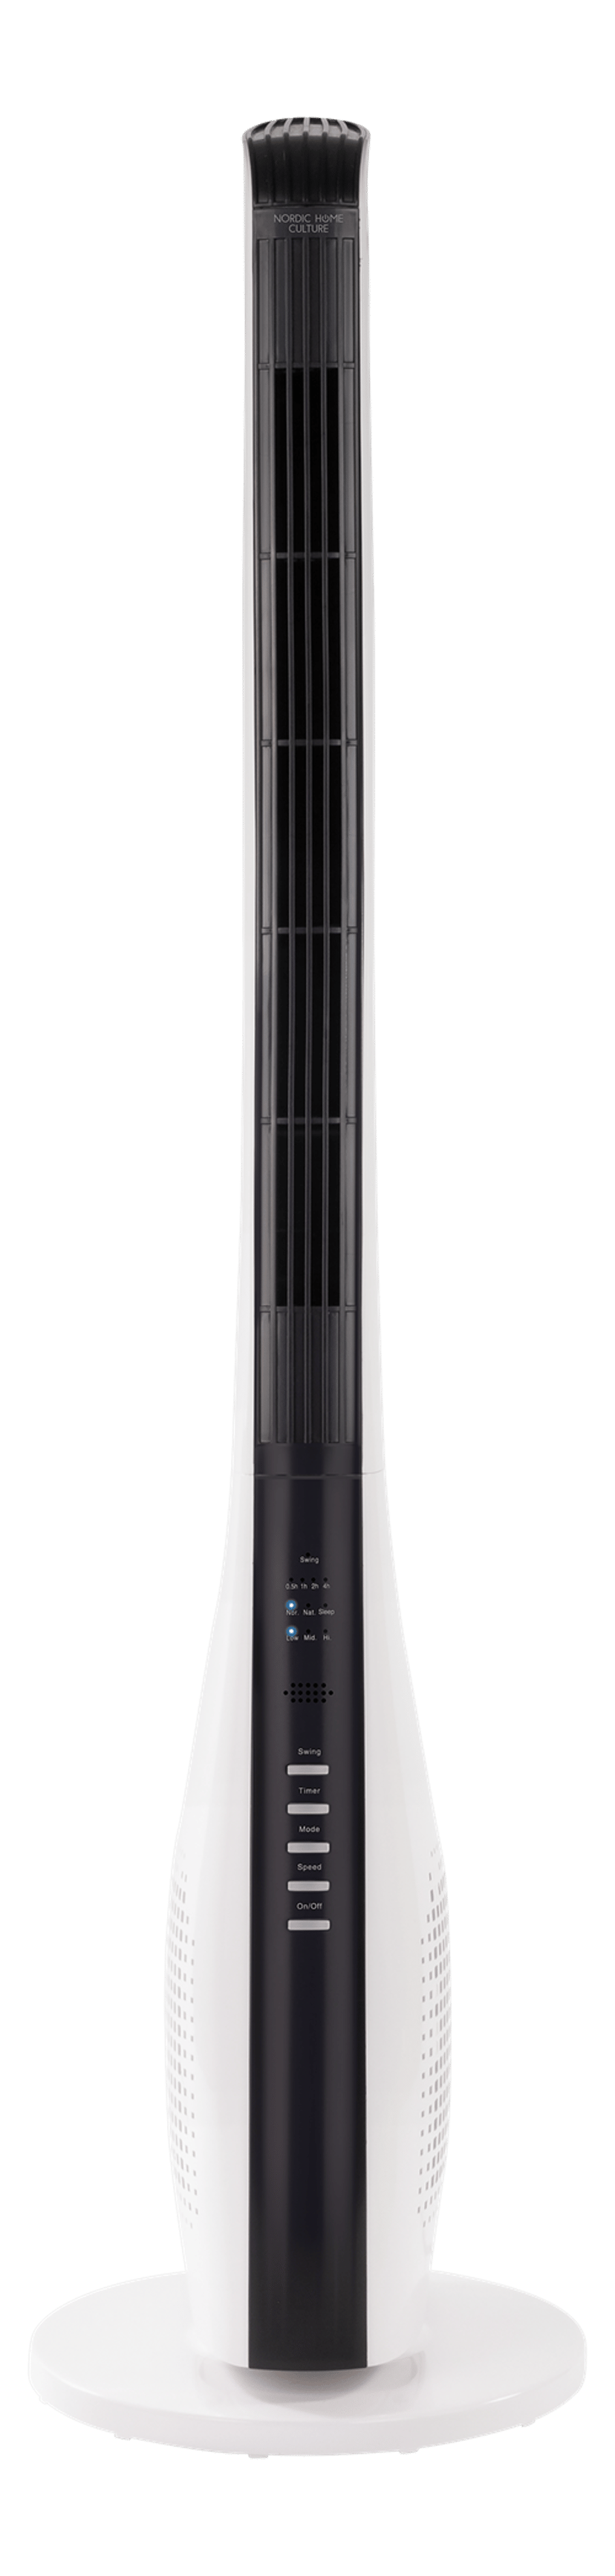 Nordic Home 2-I-1 Tower Fan 3 Speed